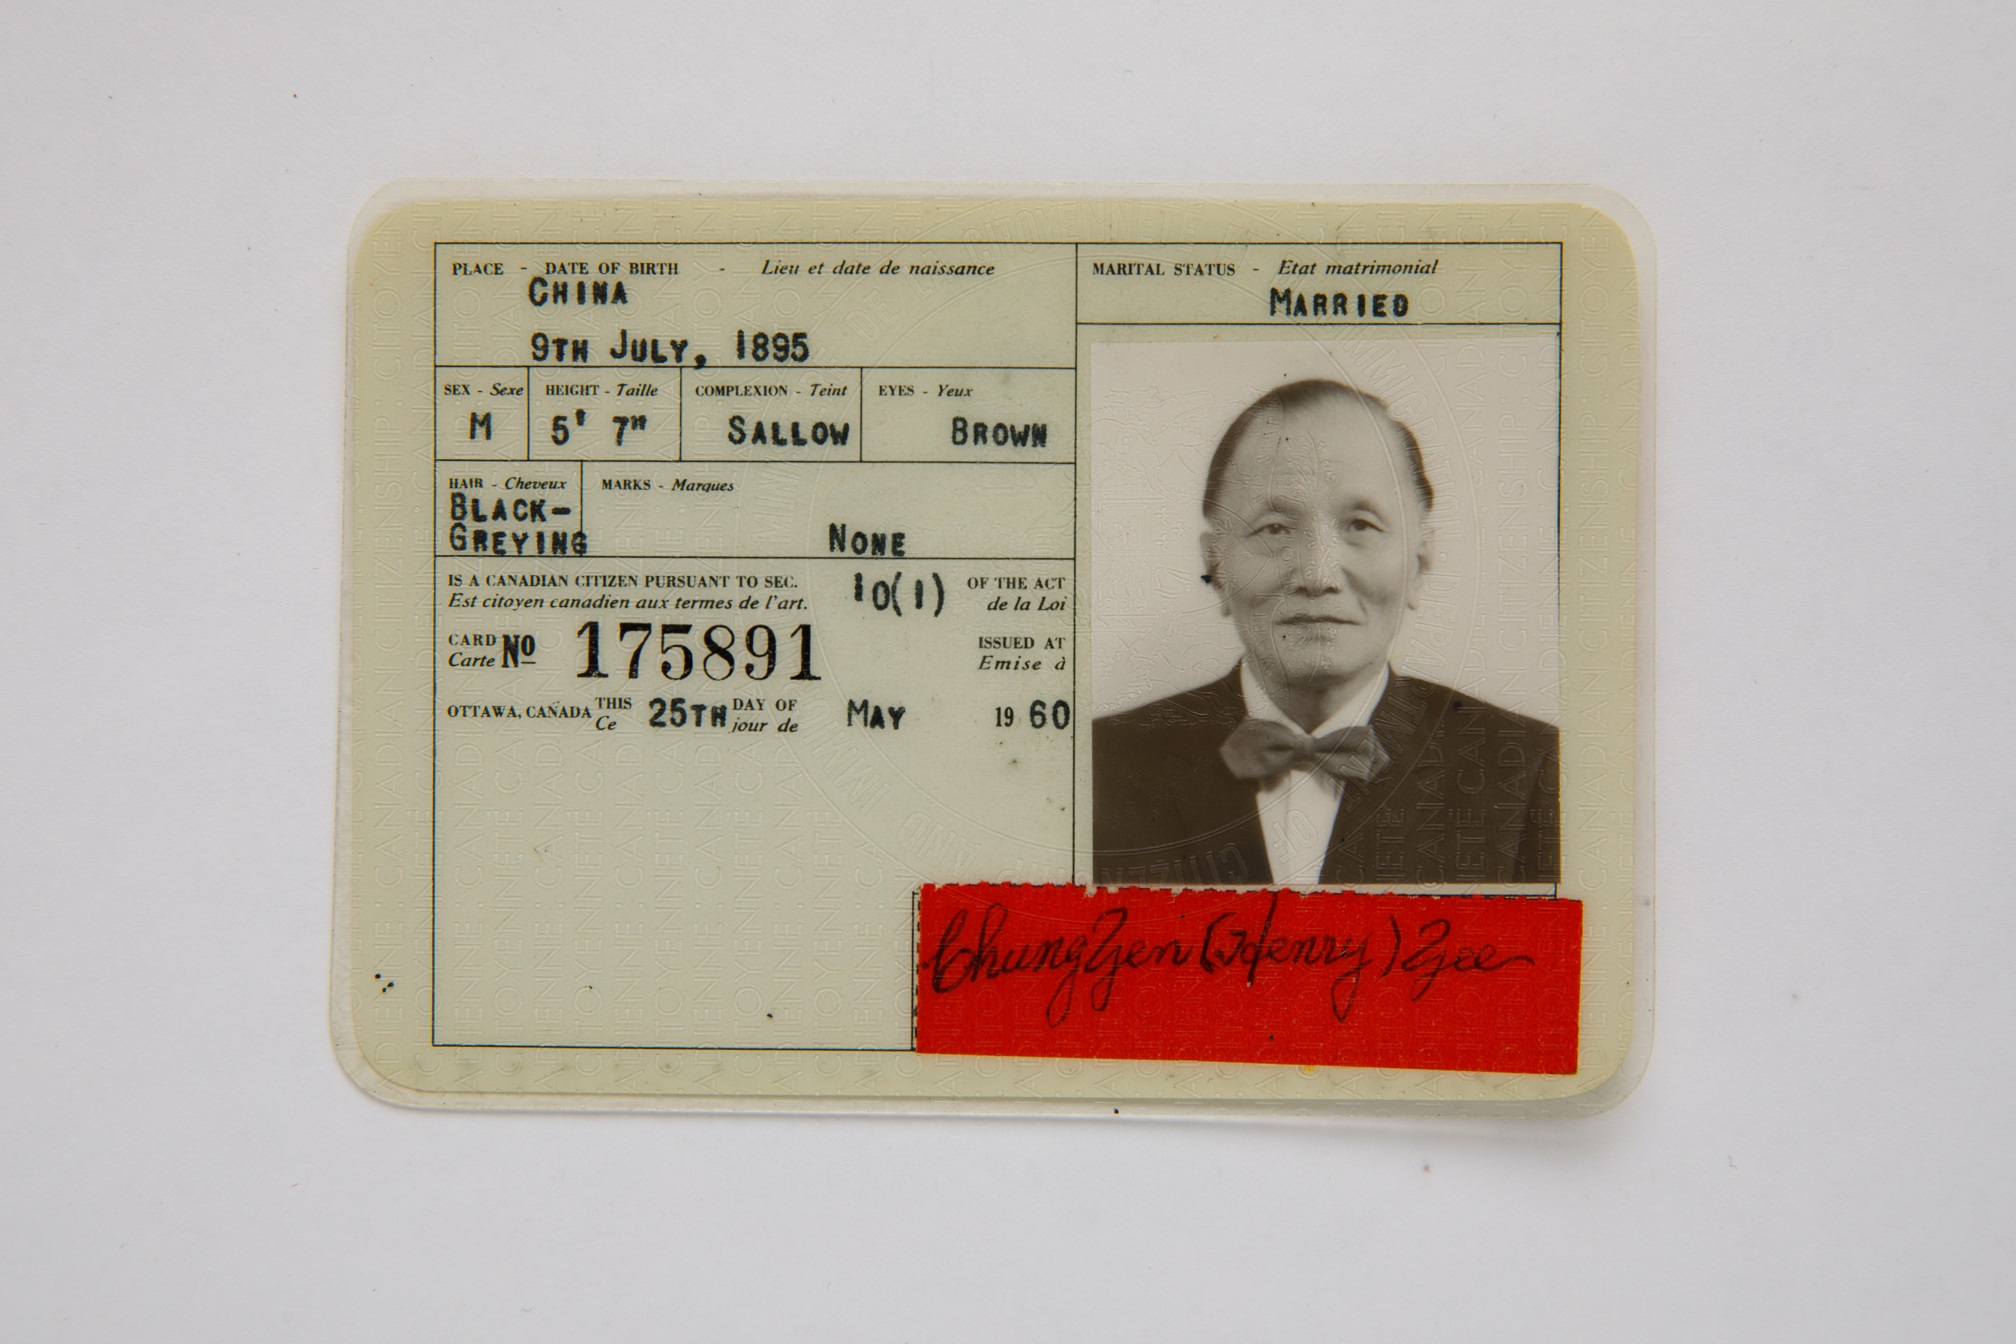 Photogragh of a citizenship card with identifiaction details and a photograph of an older man wearing a suit and bow tie.